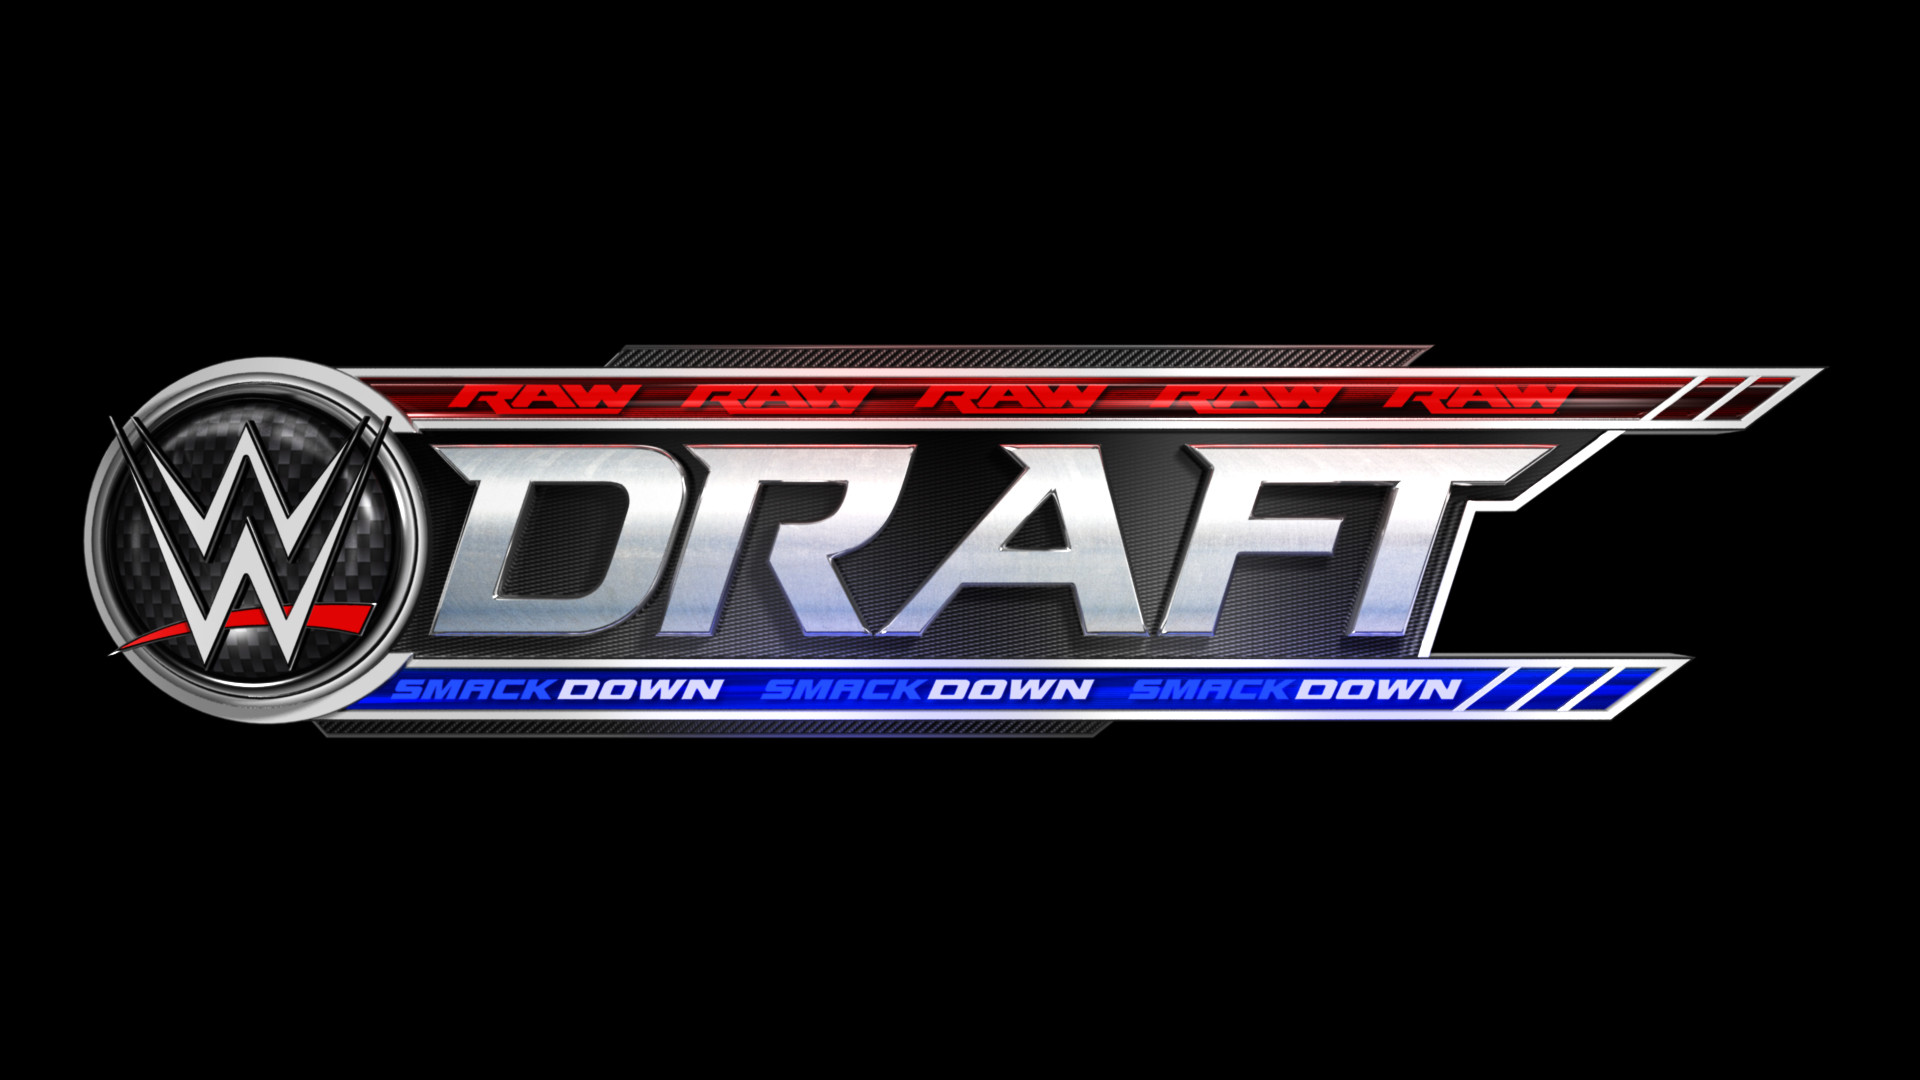 1920x1080 Smackdown Live WWE Draft Spoilers: What Is The Fate Of The Club / Balor Club  For A.J. Styles, Finn Balor, Luke Gallows & Karl Anderson?